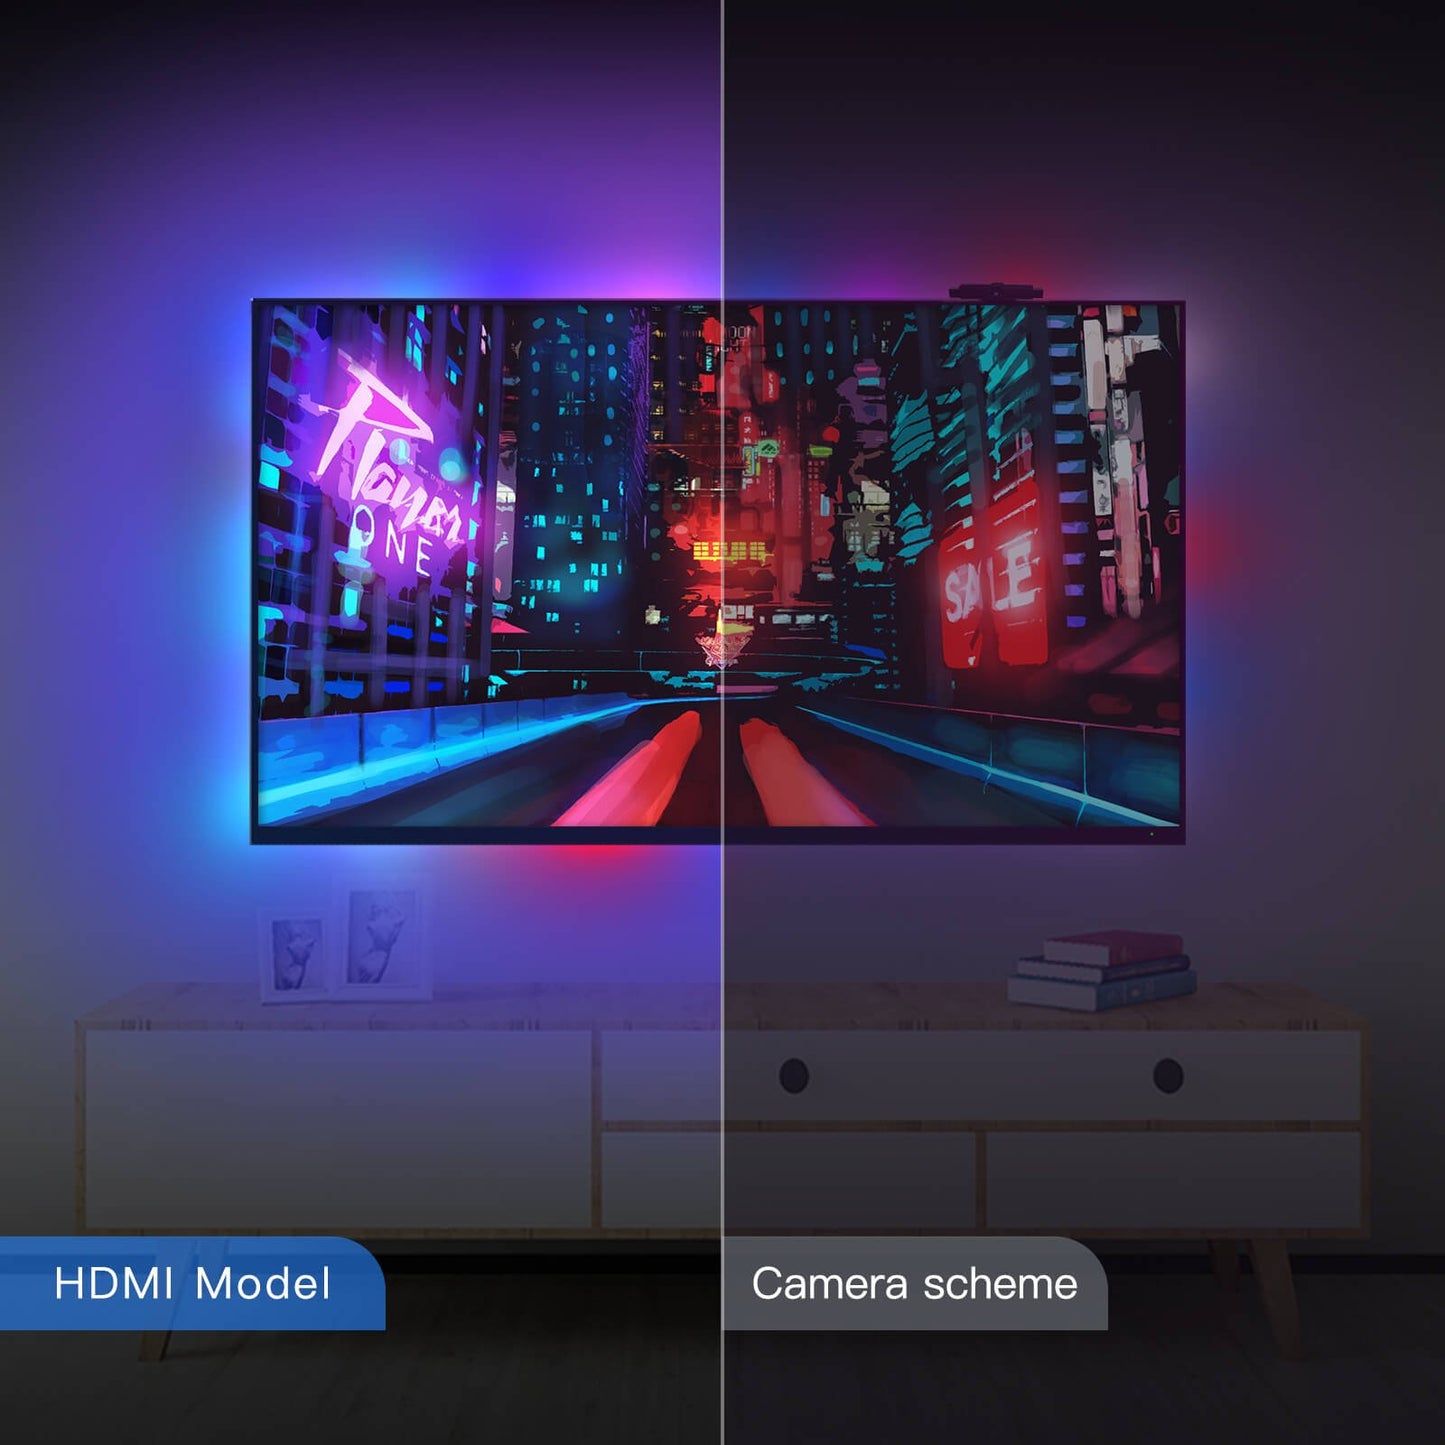 AMBIENT lighting for TV and monitor - FULL set LED strip 3M